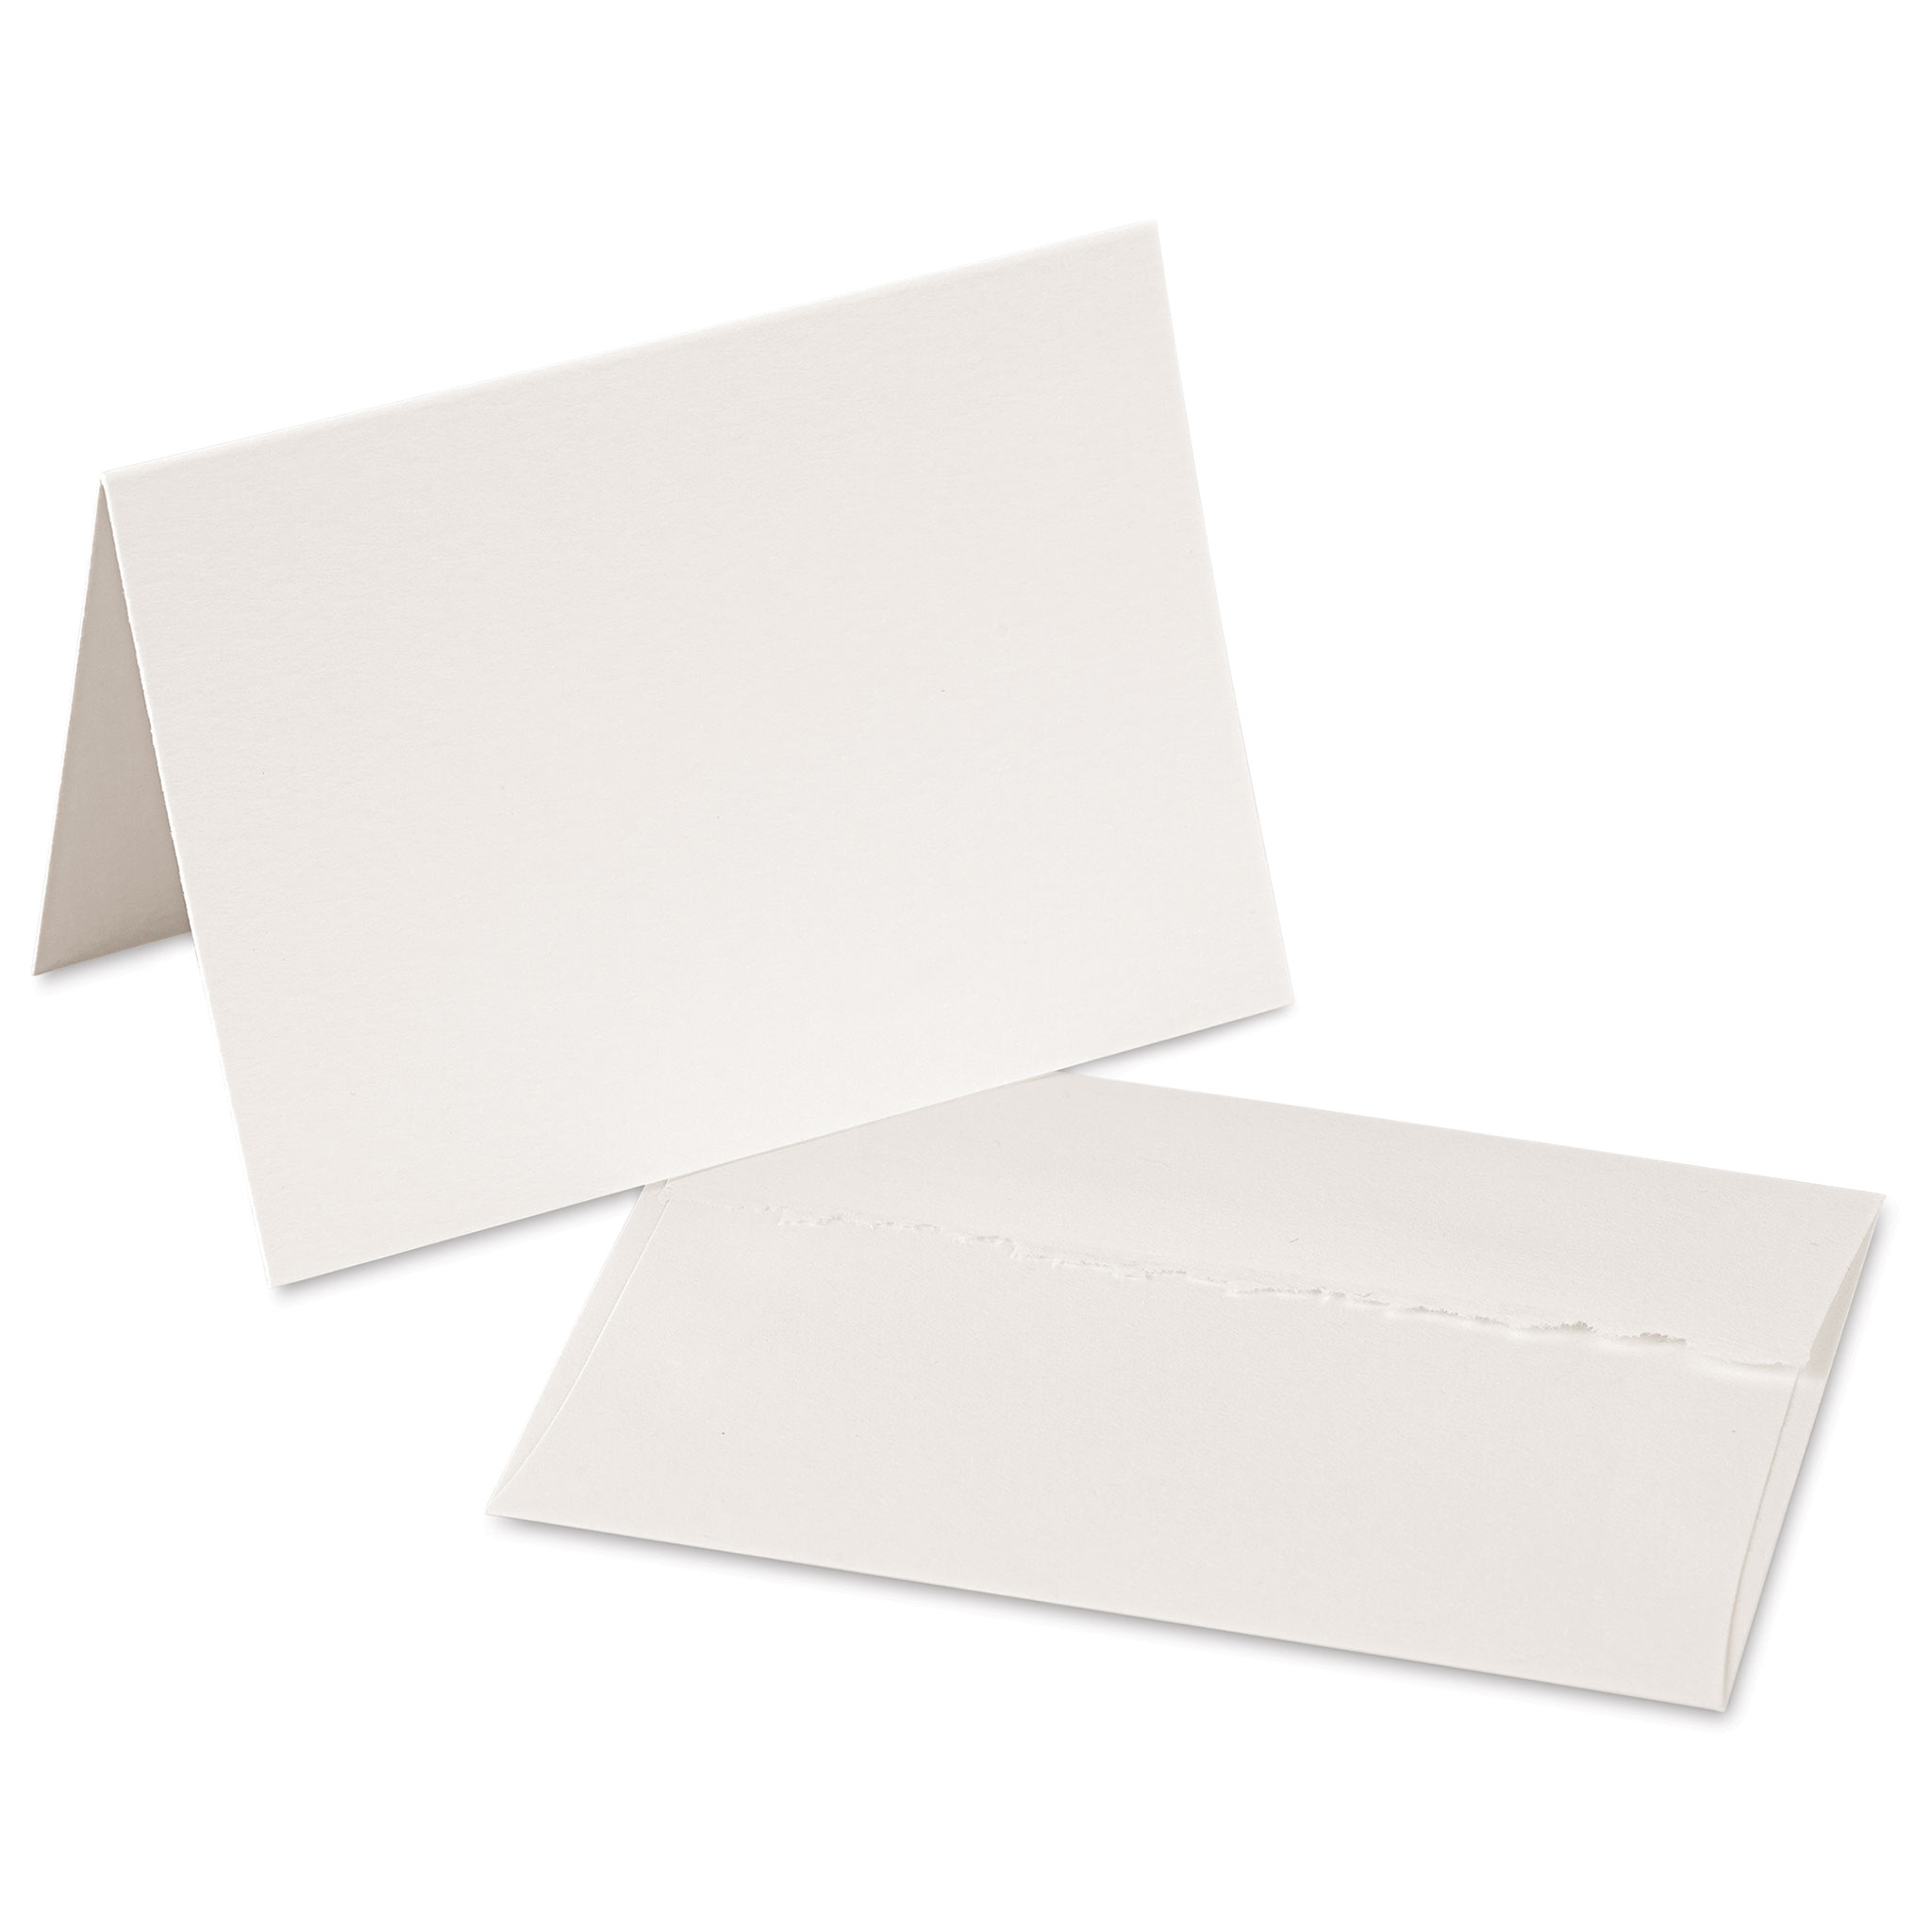 Strathmore Watercolor Blank Cards with Envelopes 5 x 6.875 White 20  Cards/Pack (56240-PK2)